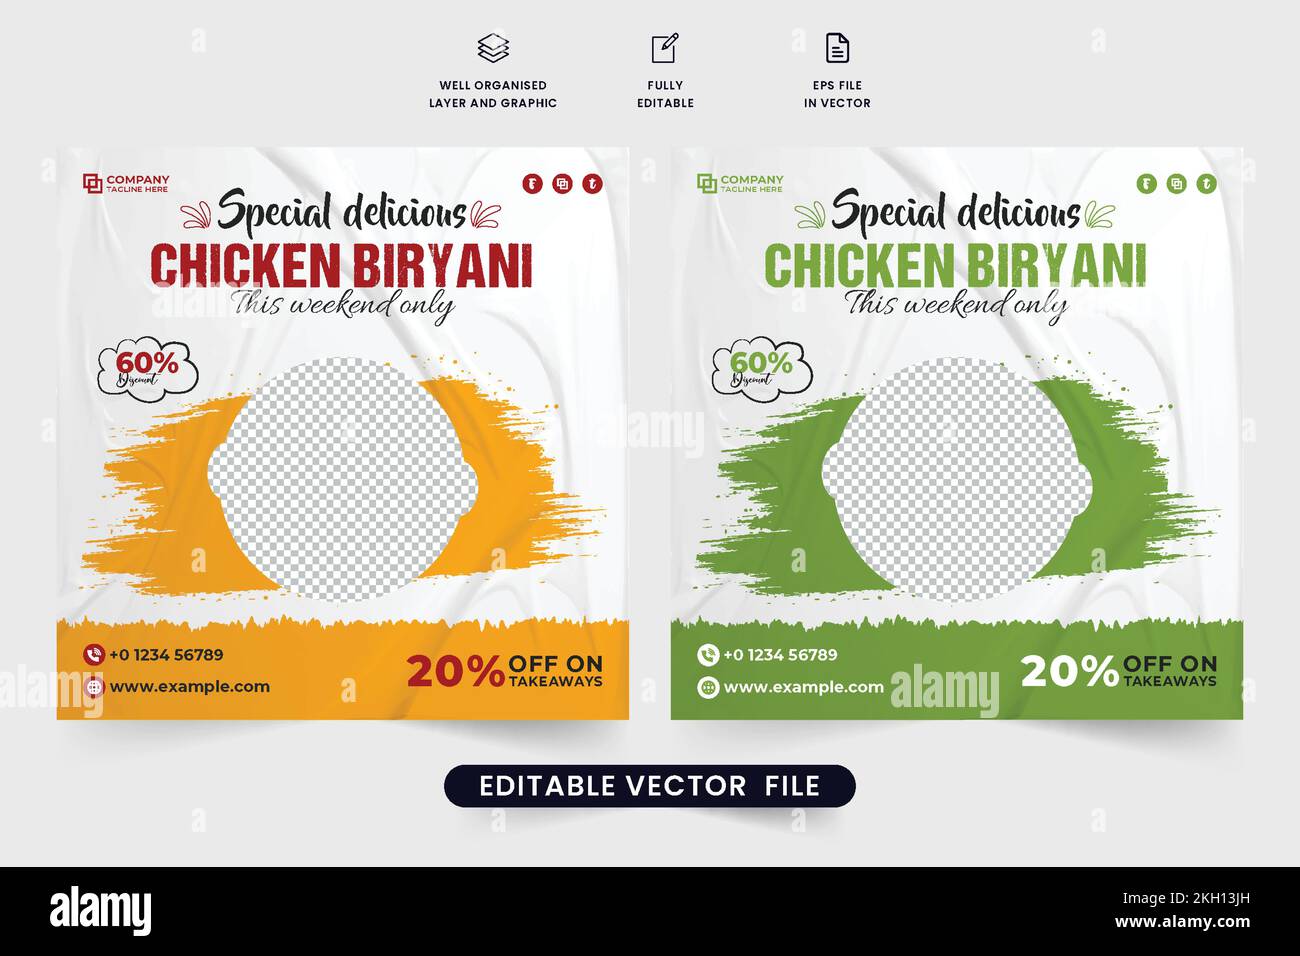 Delicious Food Menu Promotion Web Banner Design With Green And Yellow 